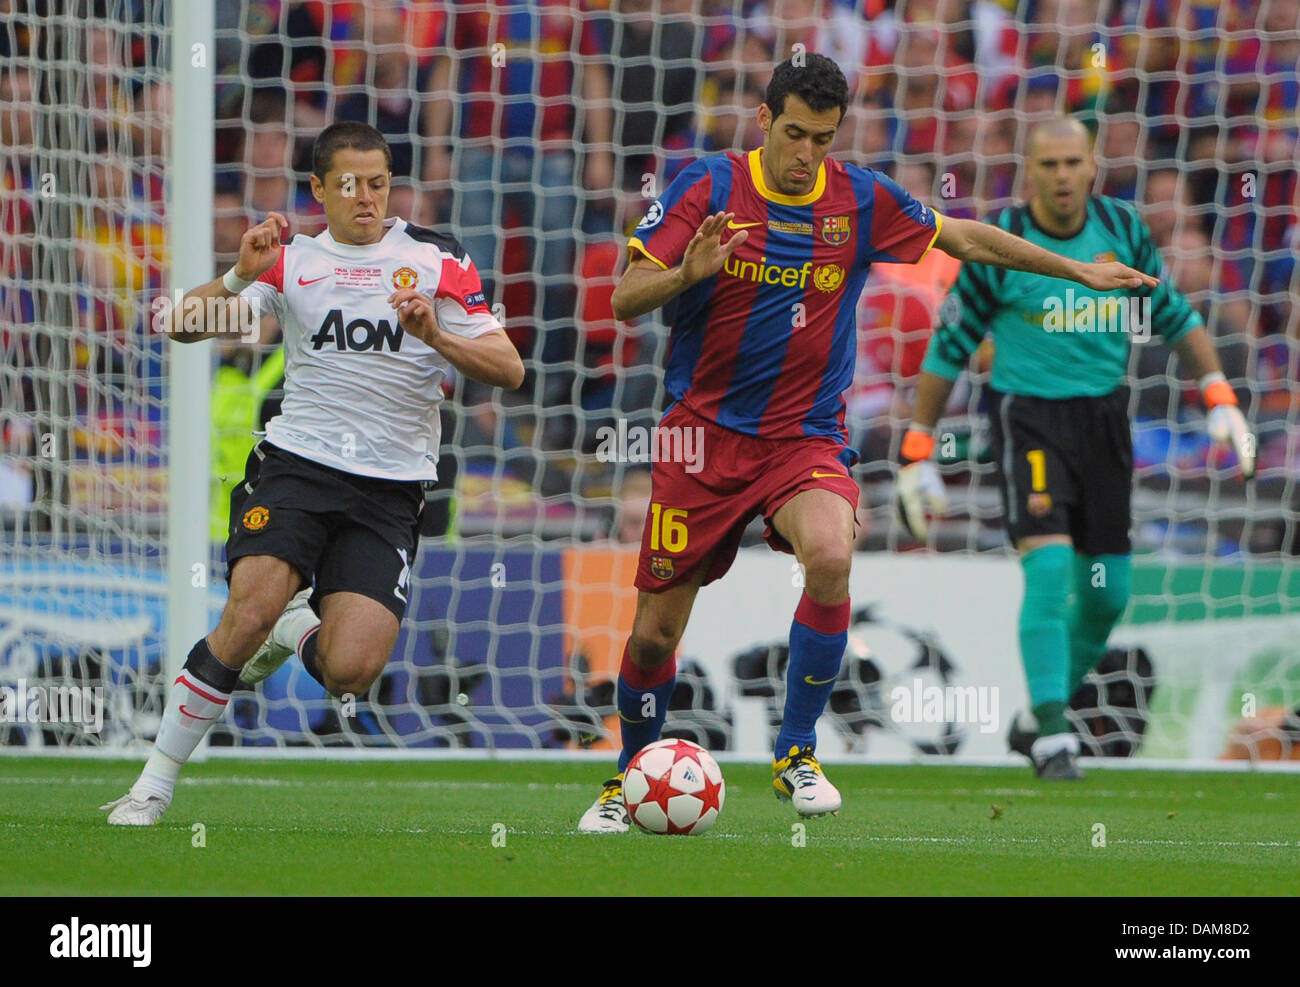 Manchester United's Javier Hernandez (L) fights for the ball with Sergio Busquets of Barcelona during the UEFA Champions League final between FC Barcelona and Manchester United at the Wembley Stadium, London, Britain, 28 May 2011. Photo: Soeren Stache Stock Photo